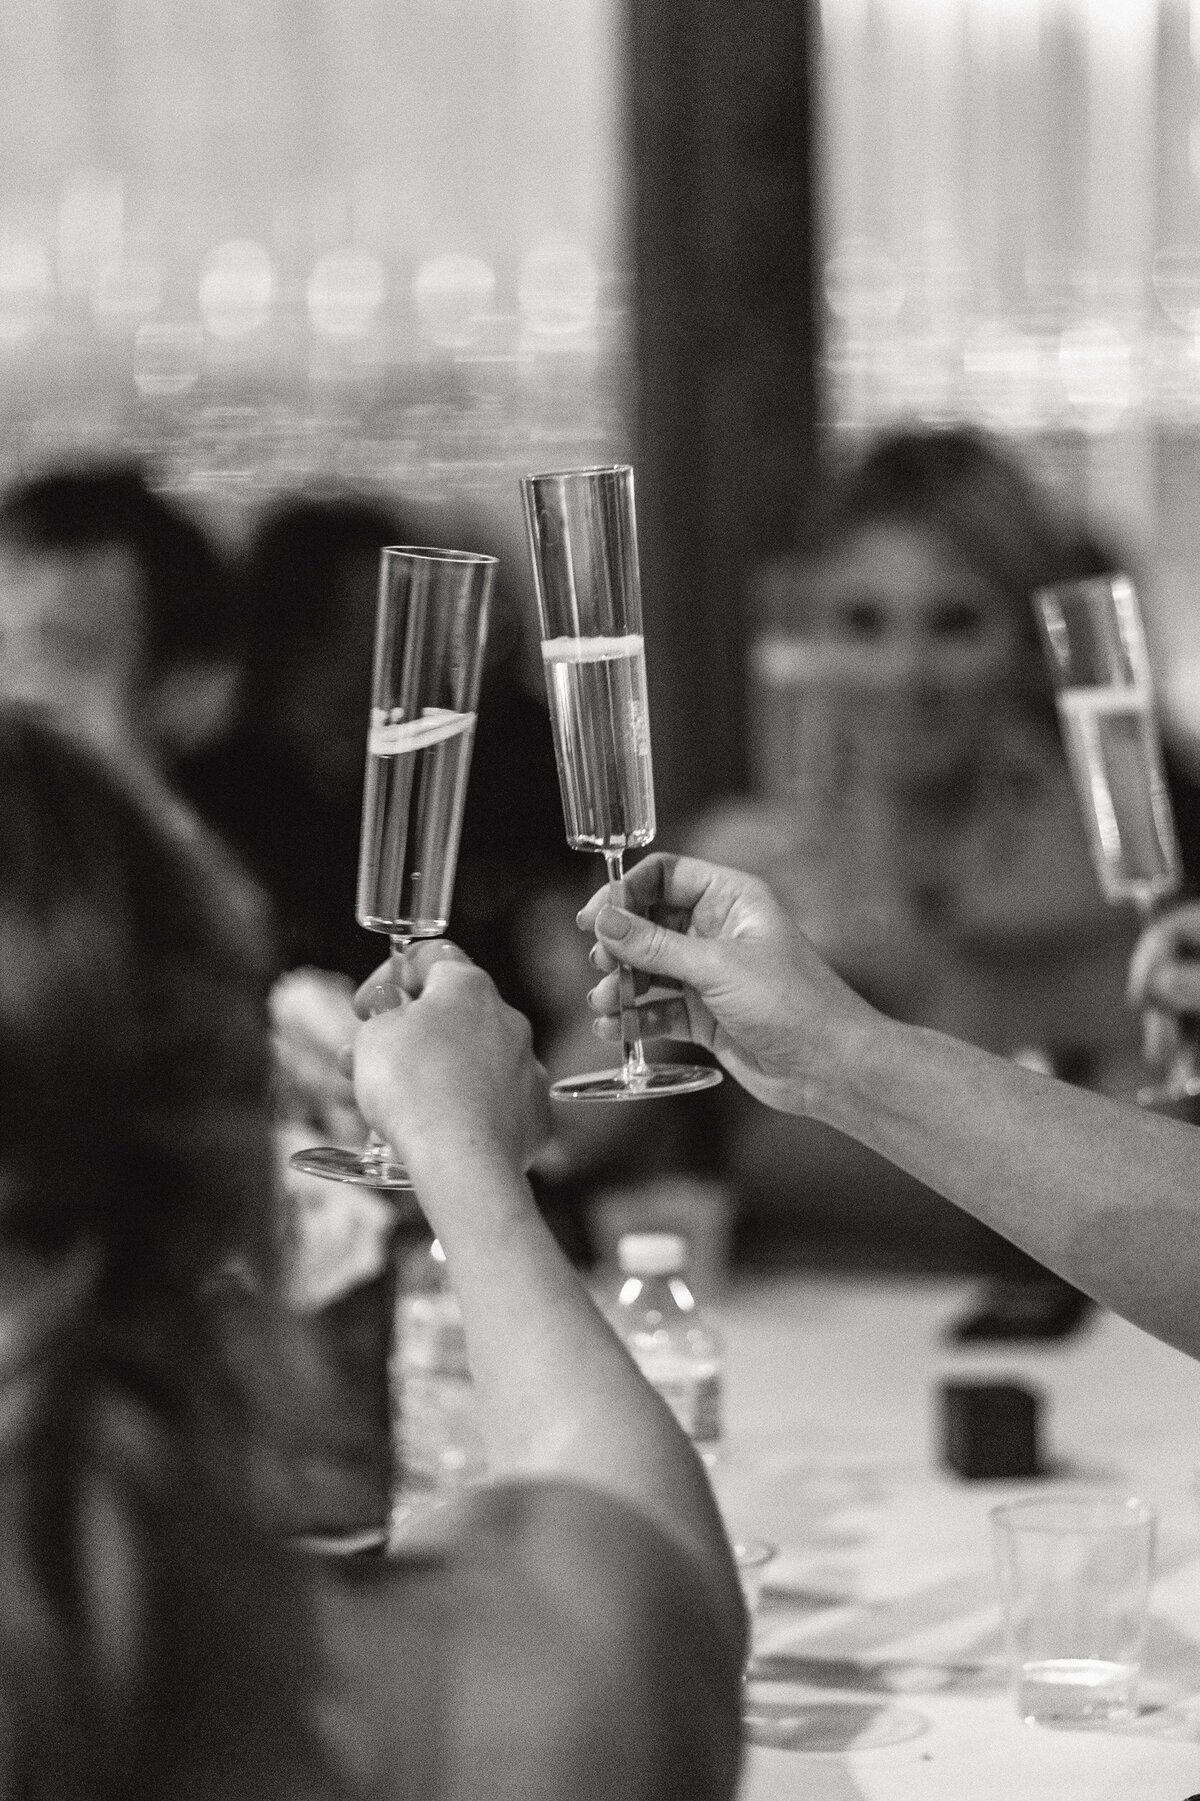 A black and white photograph of guests during the reception on Lindsay and Tom’s wedding day at Thompson Island in Boston, Massachusetts. The photo is focused on the champagne flutes as guests cheers each other during the toasts. Wedding photography by Stacie McChesney/Vitae Weddings.